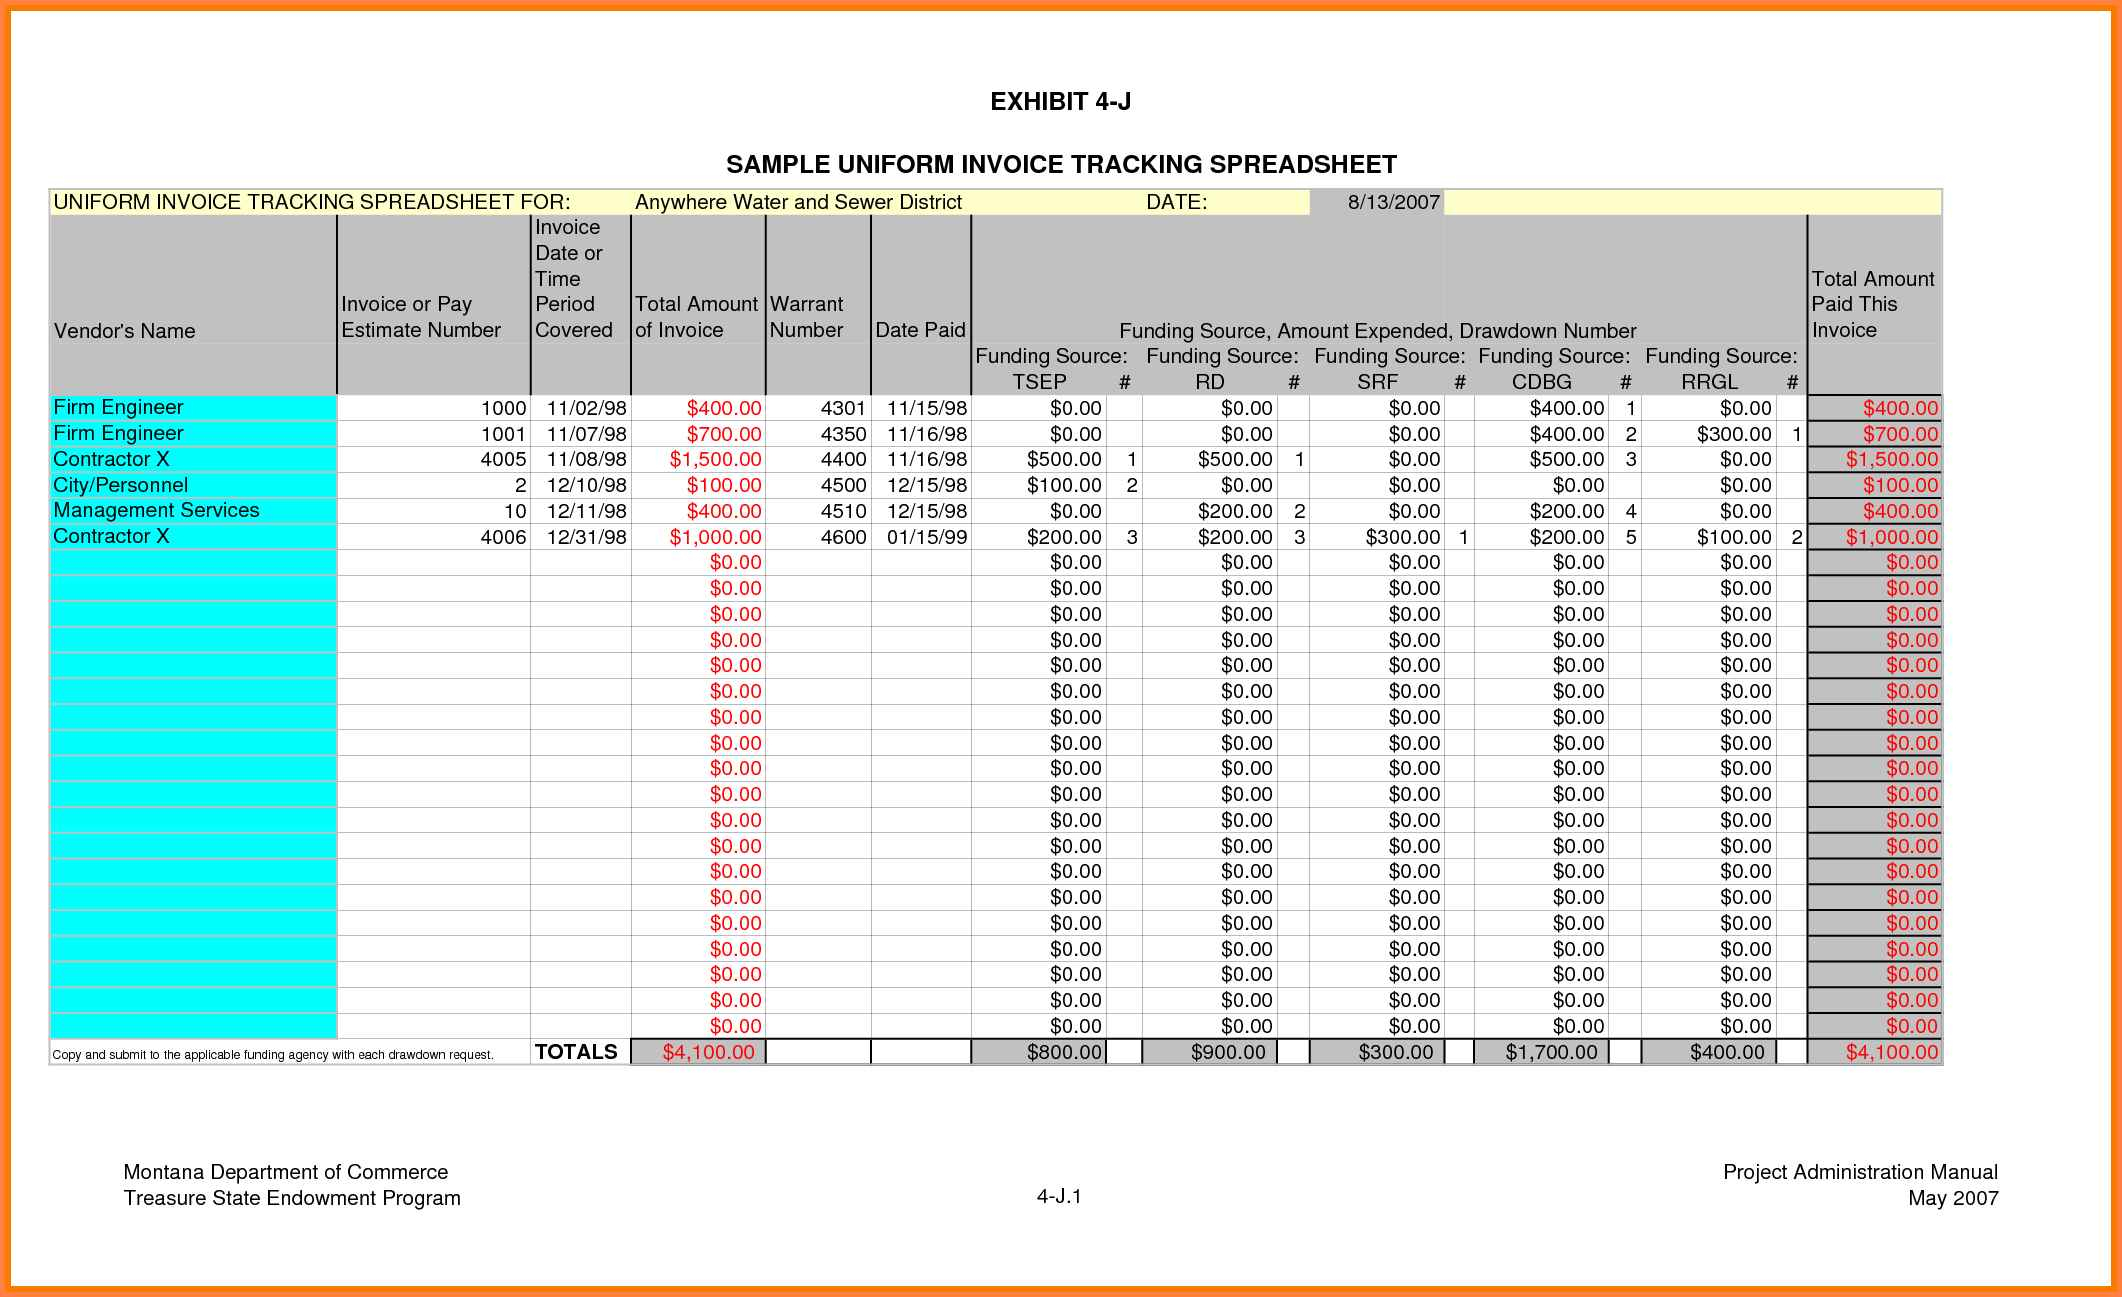 Purchase Order Tracking Excel Spreadsheet For Spreadsheet Example Of Procurement Tracking Excel 365147 Loan